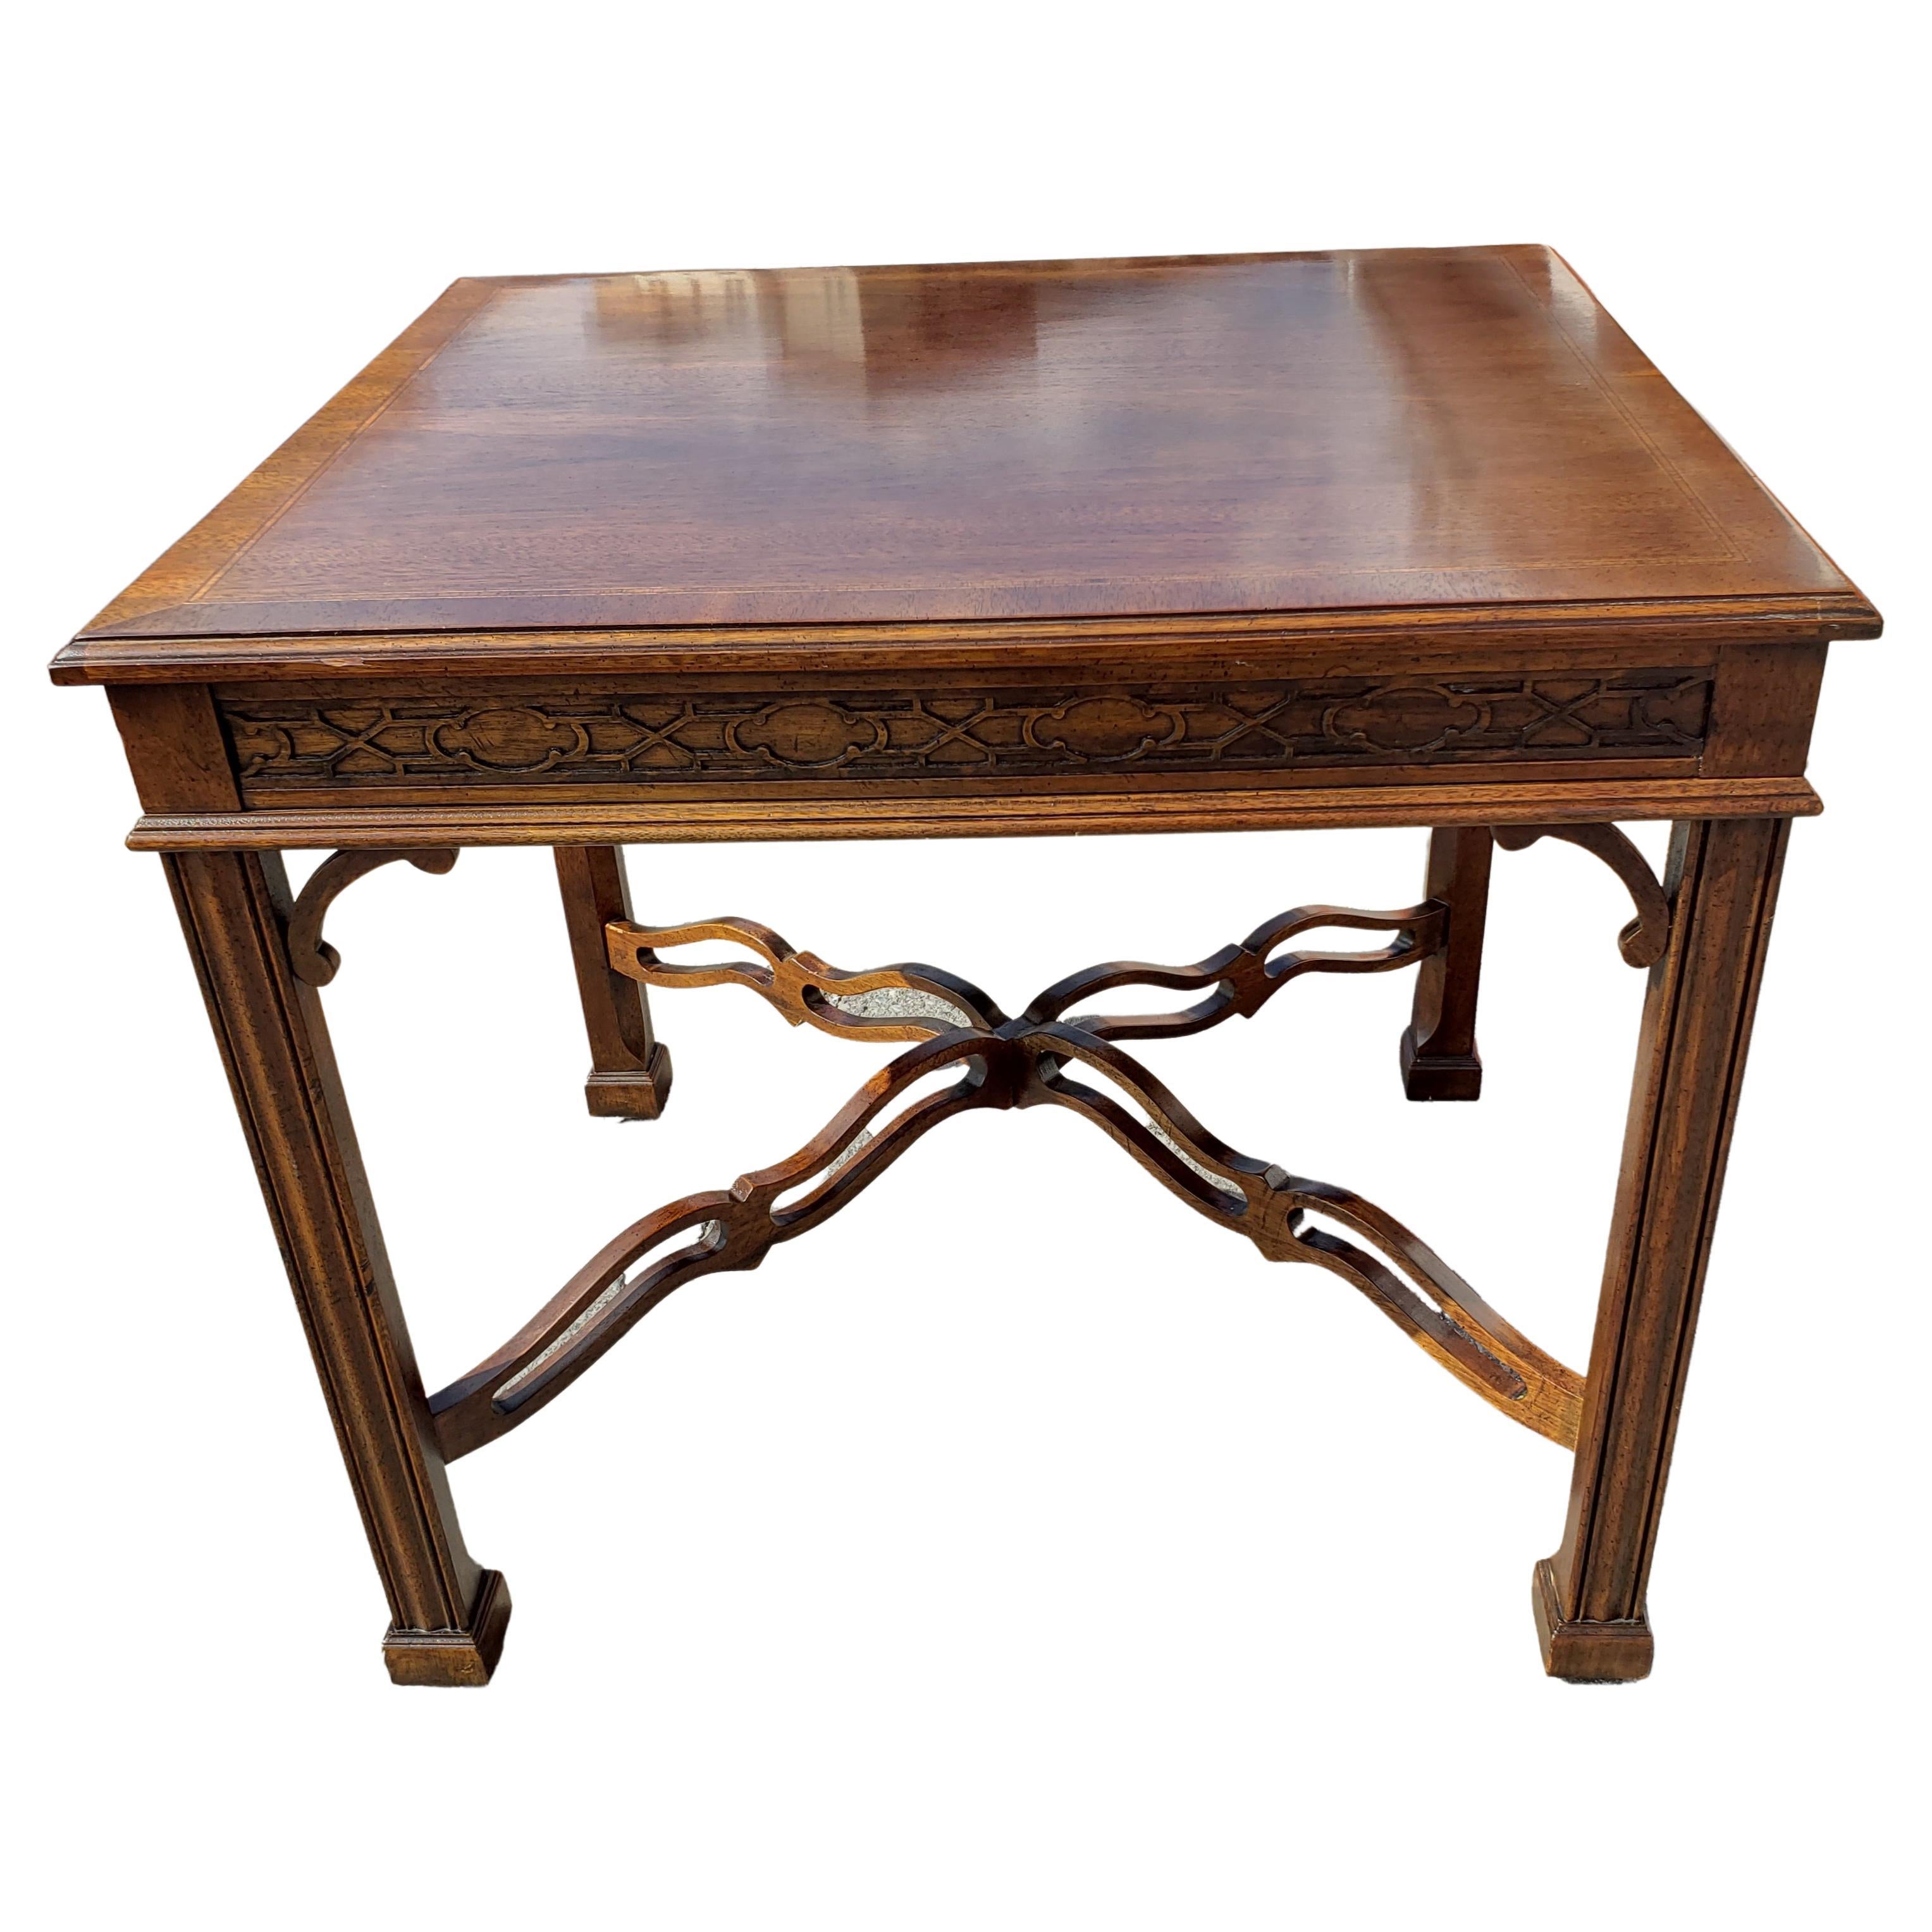 1980s Drexel Heritage Chippendale Walnut Accent Table W/ Fretwork and Banded Top For Sale